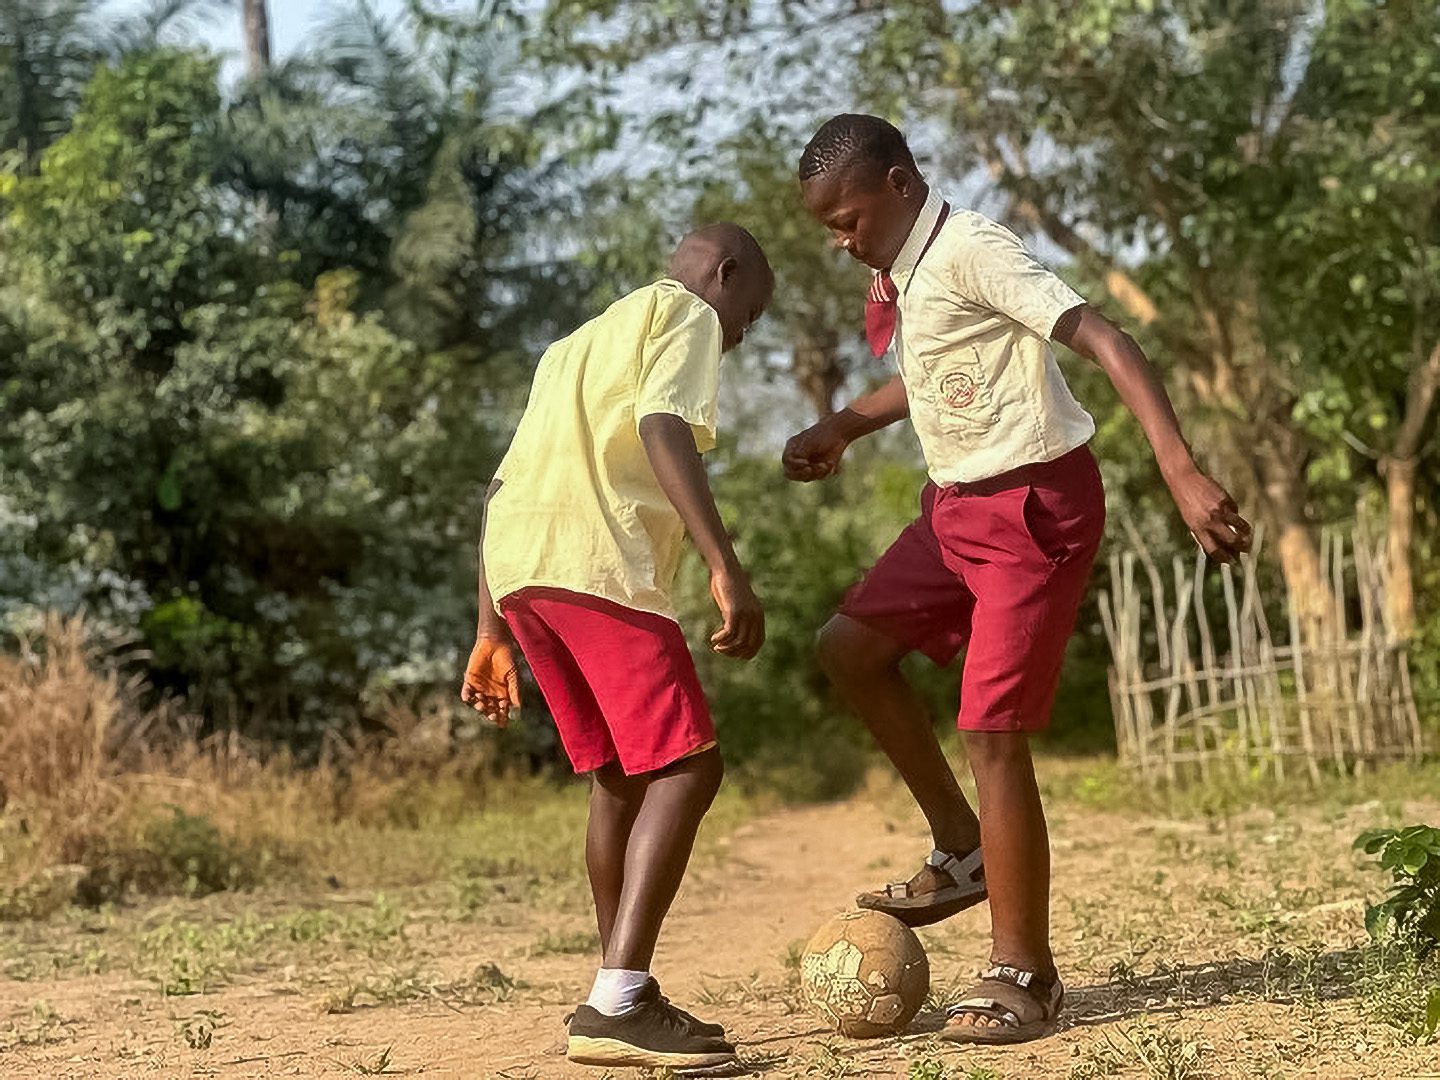 Two Sierra Leonean teenage boys play soccer together outside.